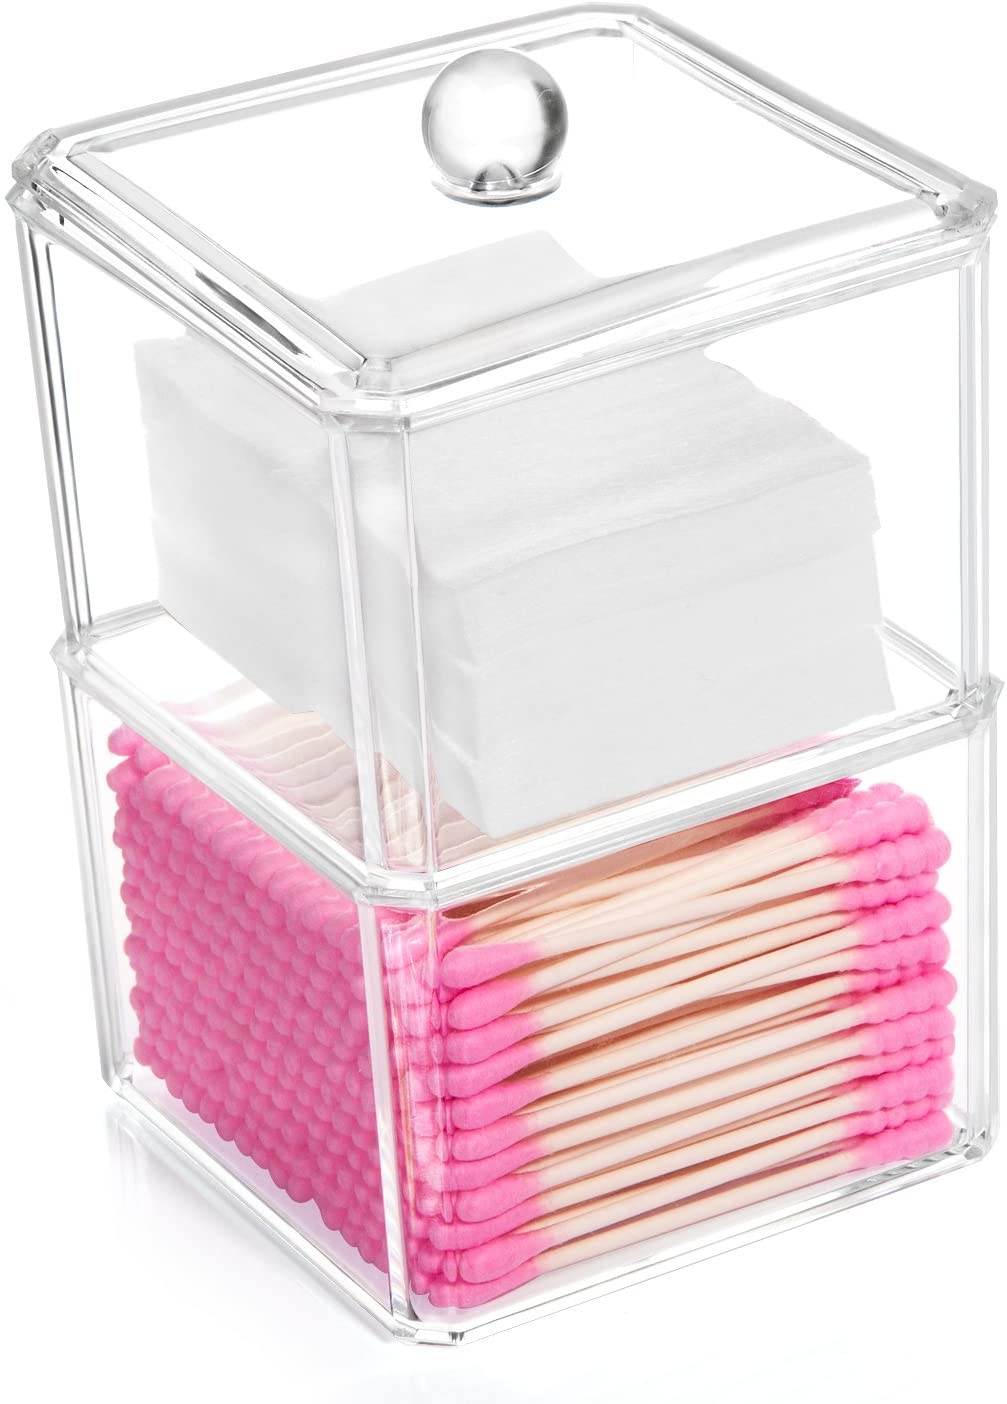 HBlife Cotton Ball and Swab Holder Organizer, Clear Acrylic Cotton Pad Container for Cotton Swabs, Q-Tips, Make Up Pads, Cosmetics and More